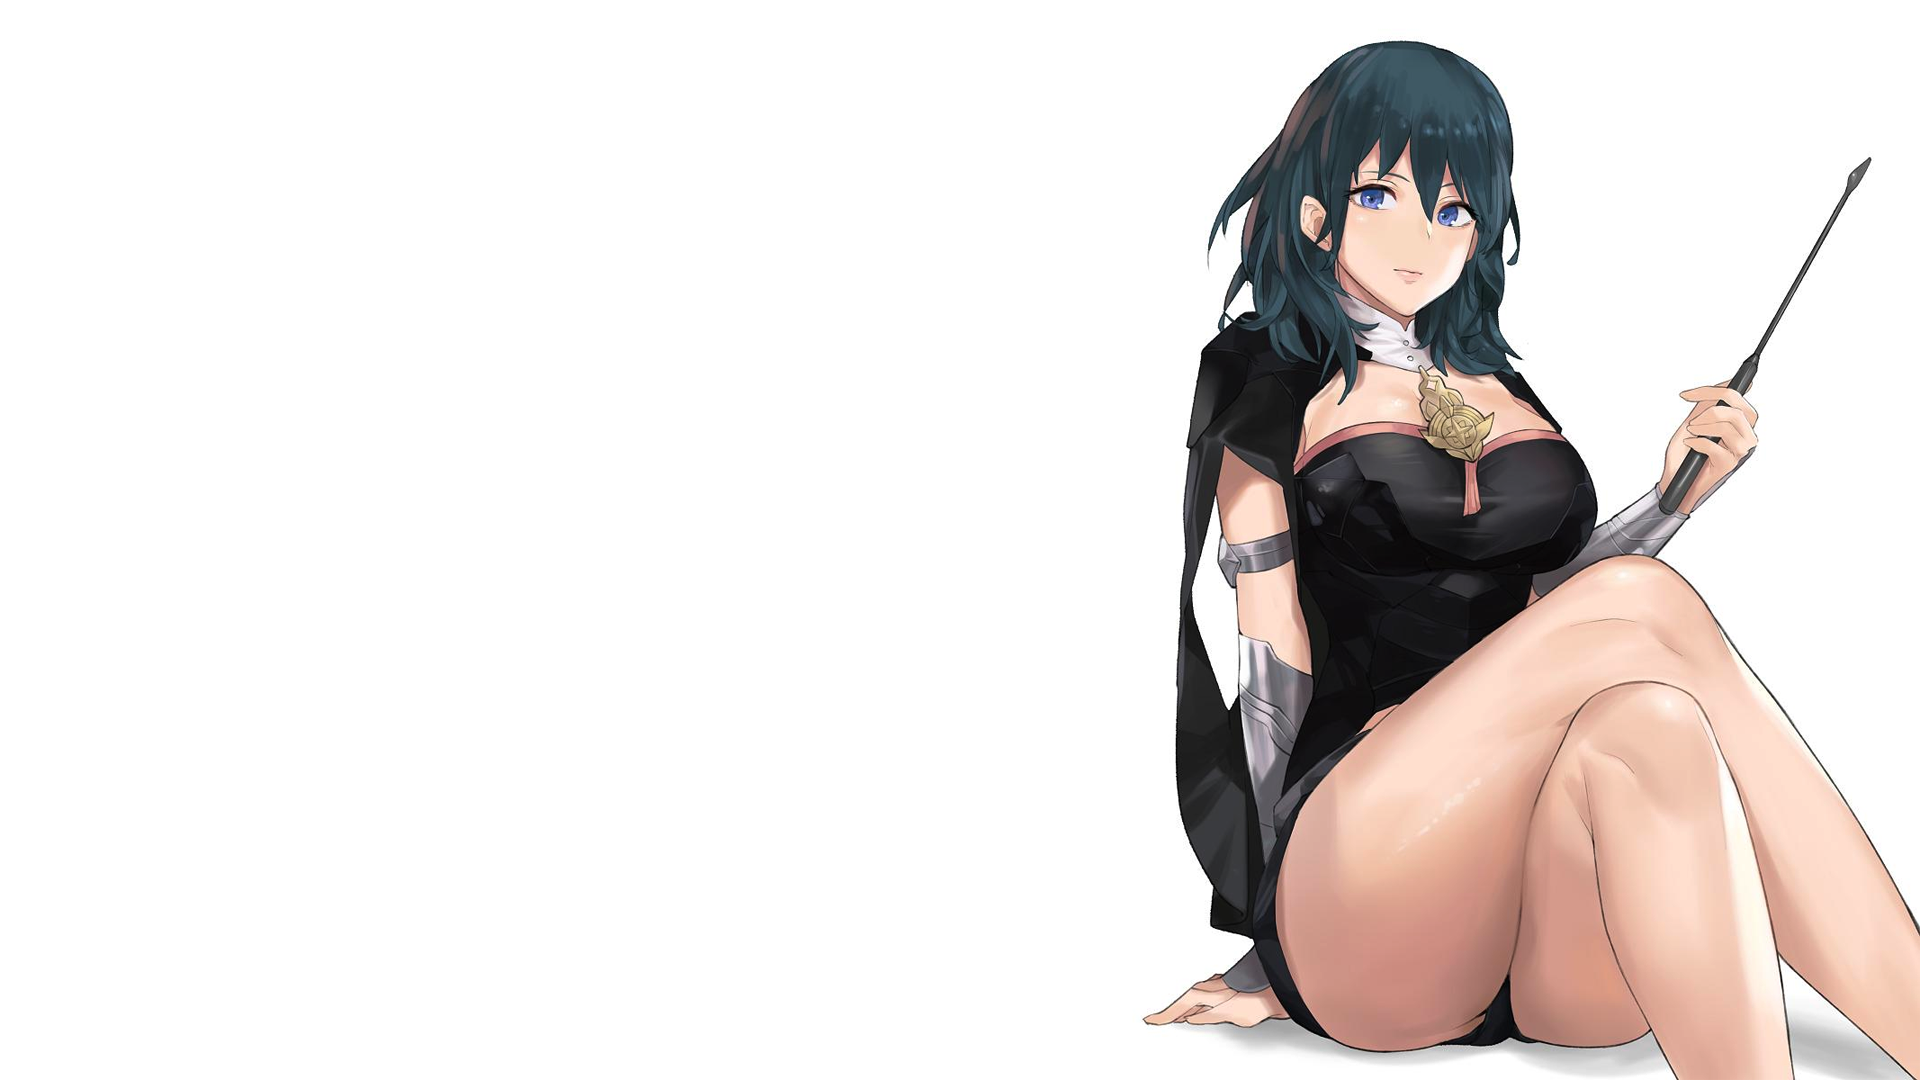 Anime 1920x1080 anime anime girls simple background Fire Emblem video game characters thighs teachers big boobs ass cleavage Byleth